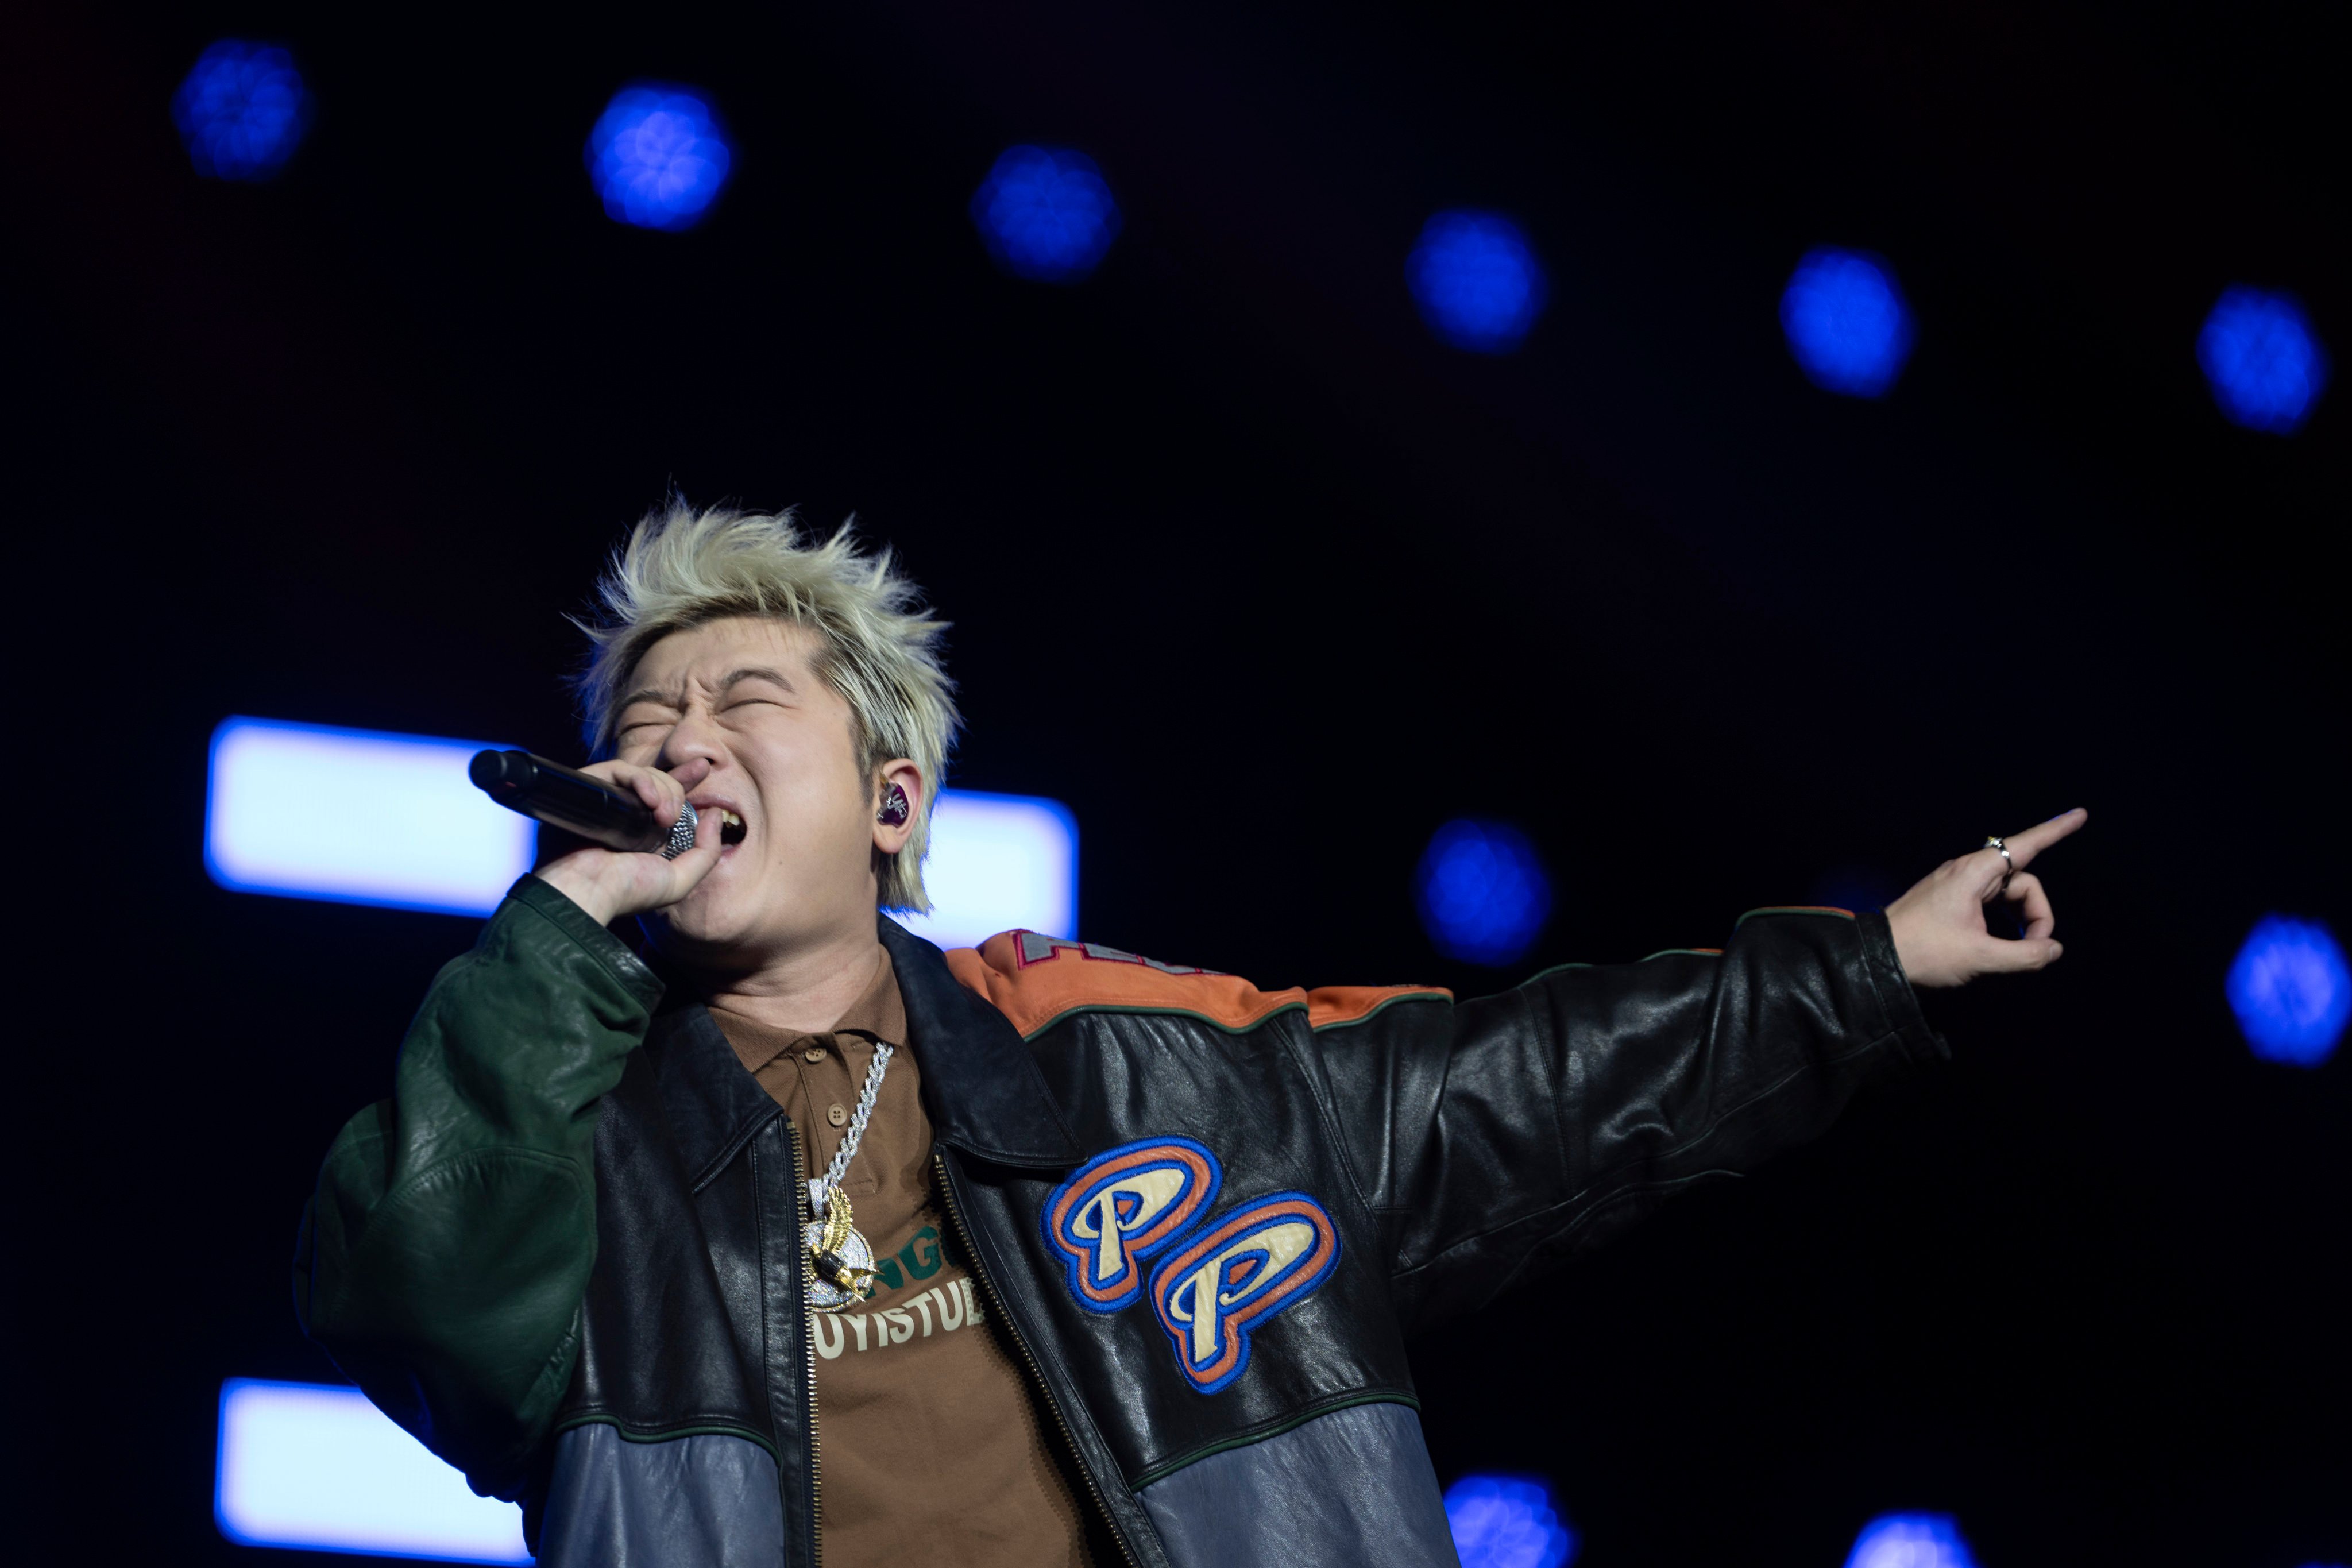 Chinese rapper Wang Yitai performs at a concert in Chengdu in China’s Sichuan province. For a while in 2018, hip hop was censored in China. Today, rappers are looking forward to the coming of a golden age for the music genre. Photo: AP